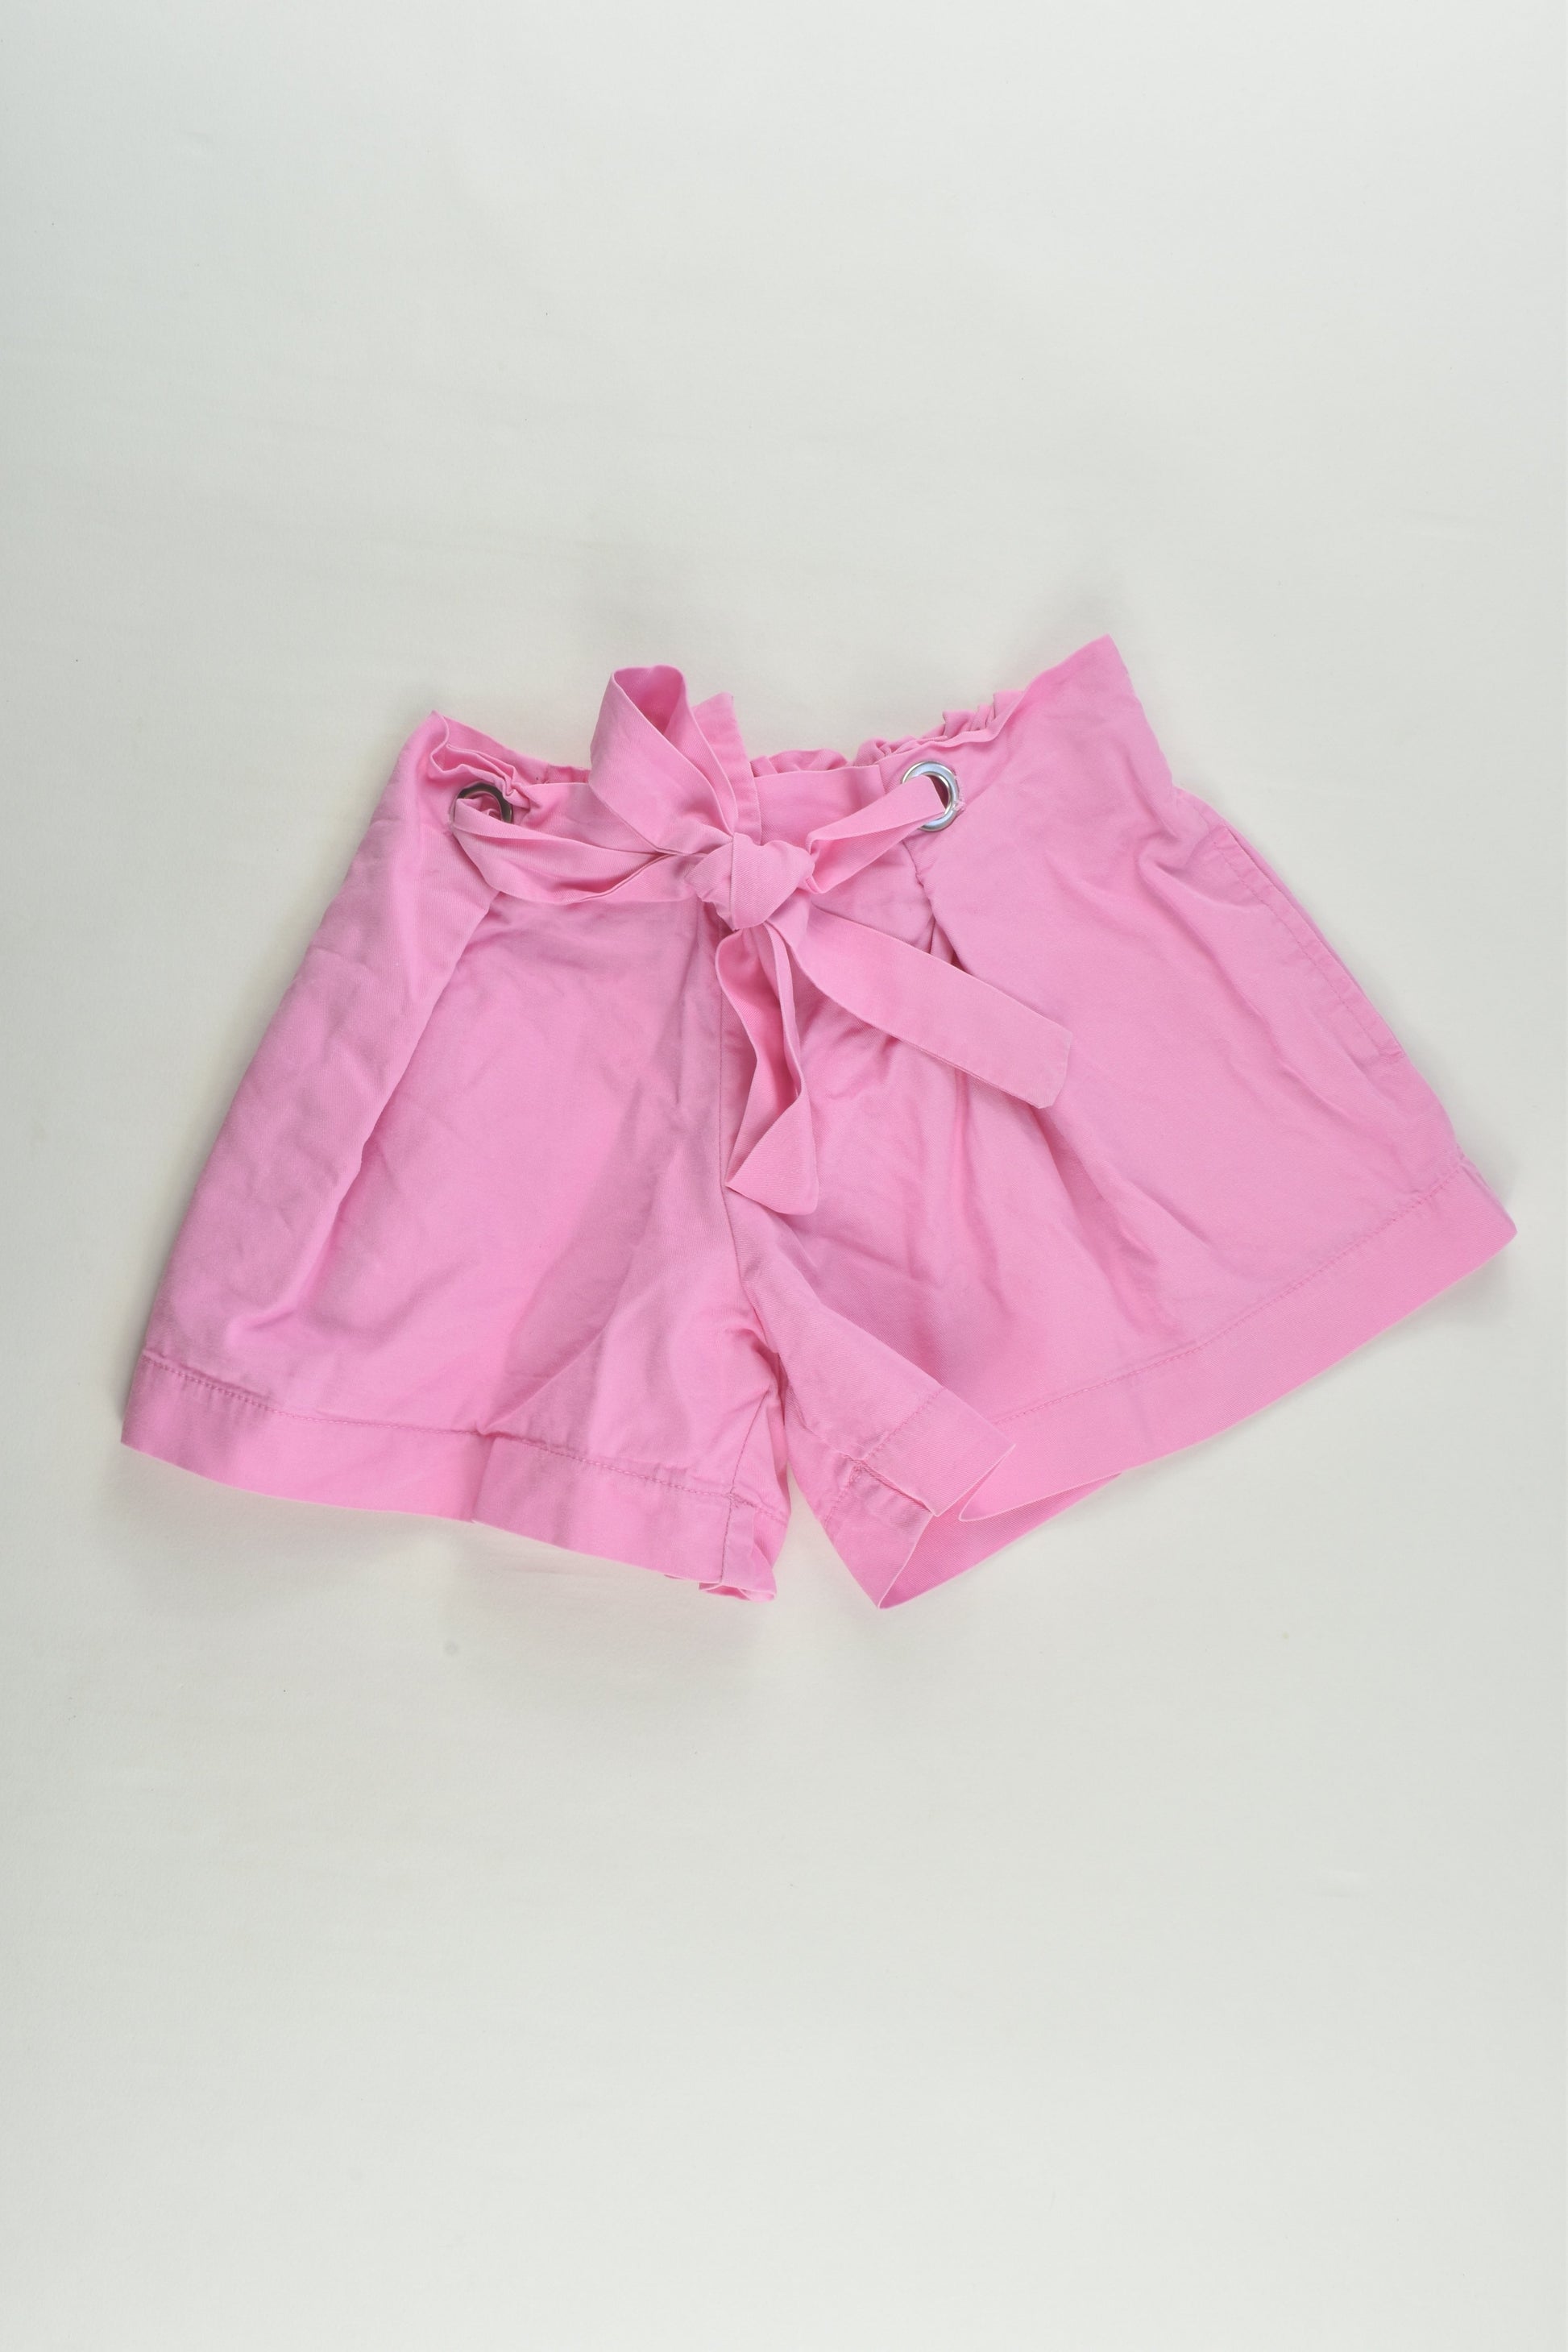 Seed Heritage Size 5 Lightweight Shorts